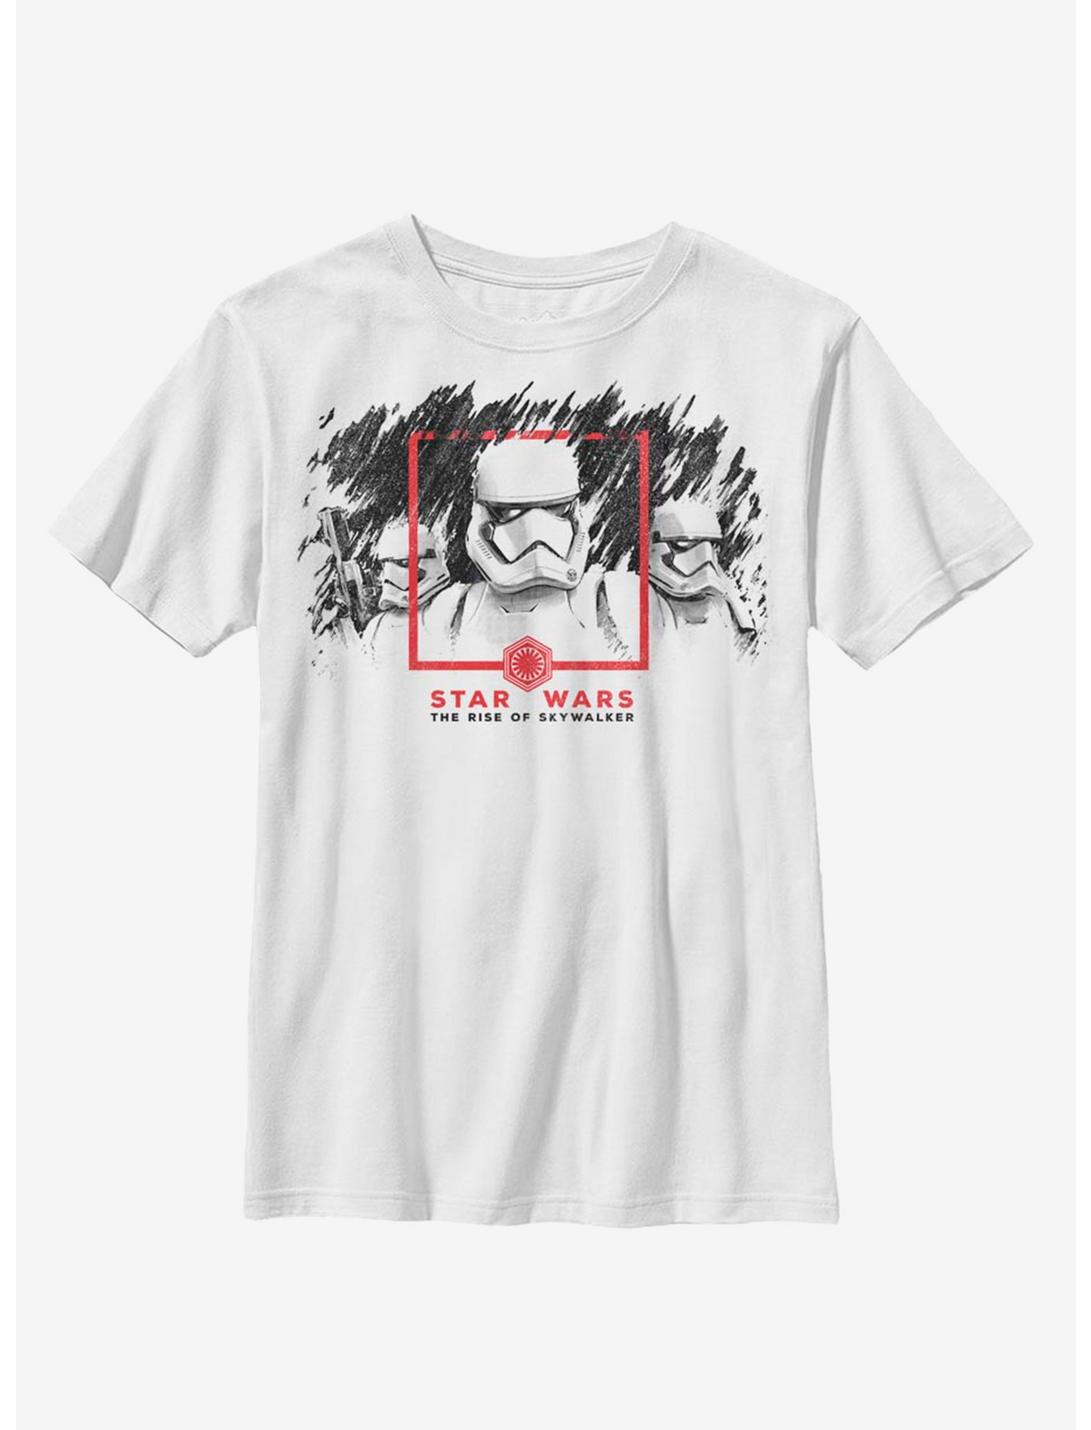 Star Wars Episode IX The Rise Of Skywalker Dawn Patrol Two Youth T-Shirt, WHITE, hi-res